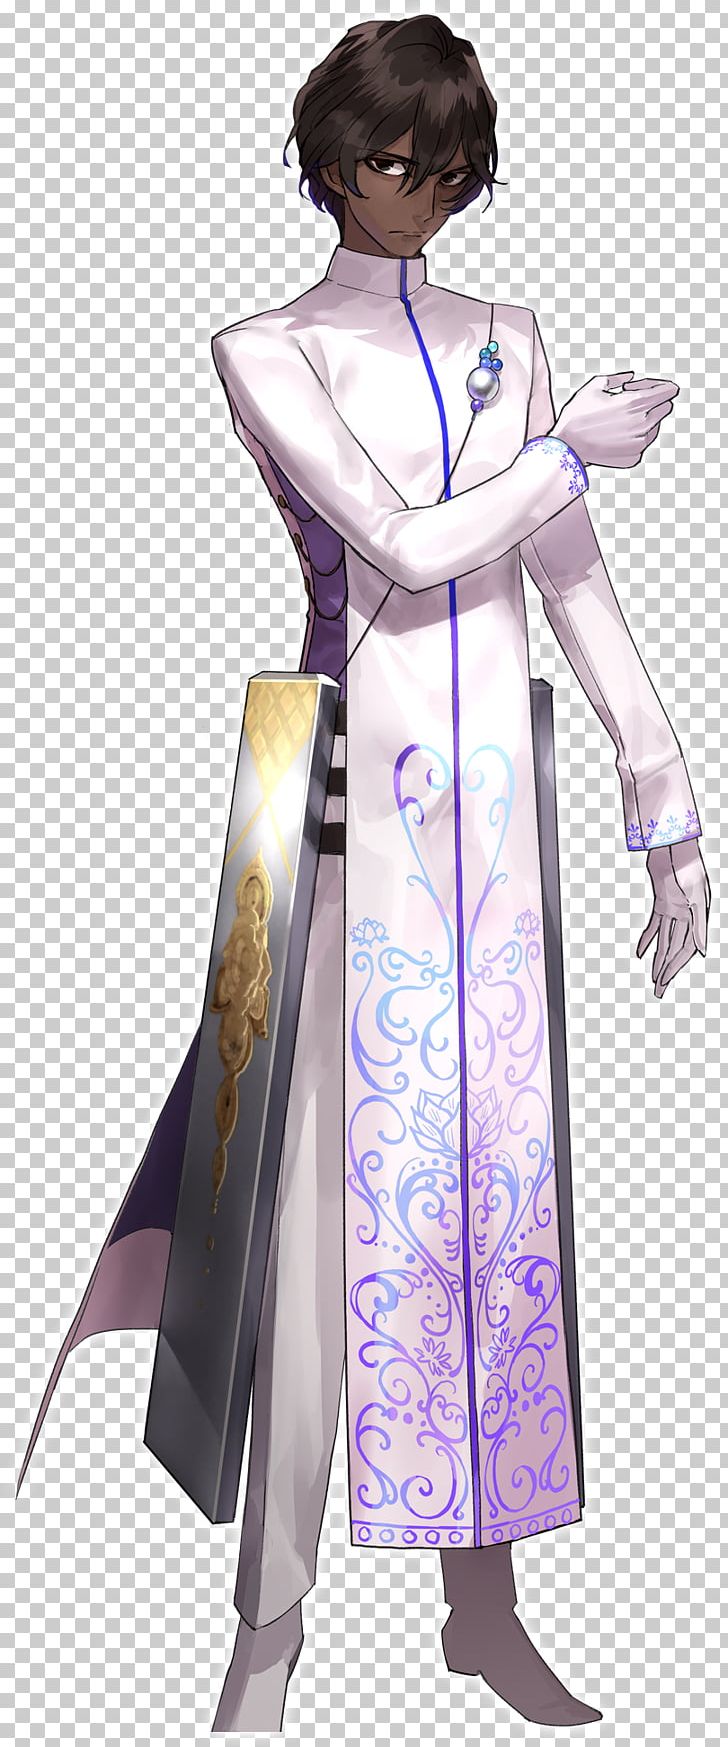 Fate/Extella Link Fate/stay Night Fate/Extella: The Umbral Star Fate/Extra Fate/Grand Order PNG, Clipart, Anime, Arjuna, Clothing, Costume, Costume Design Free PNG Download